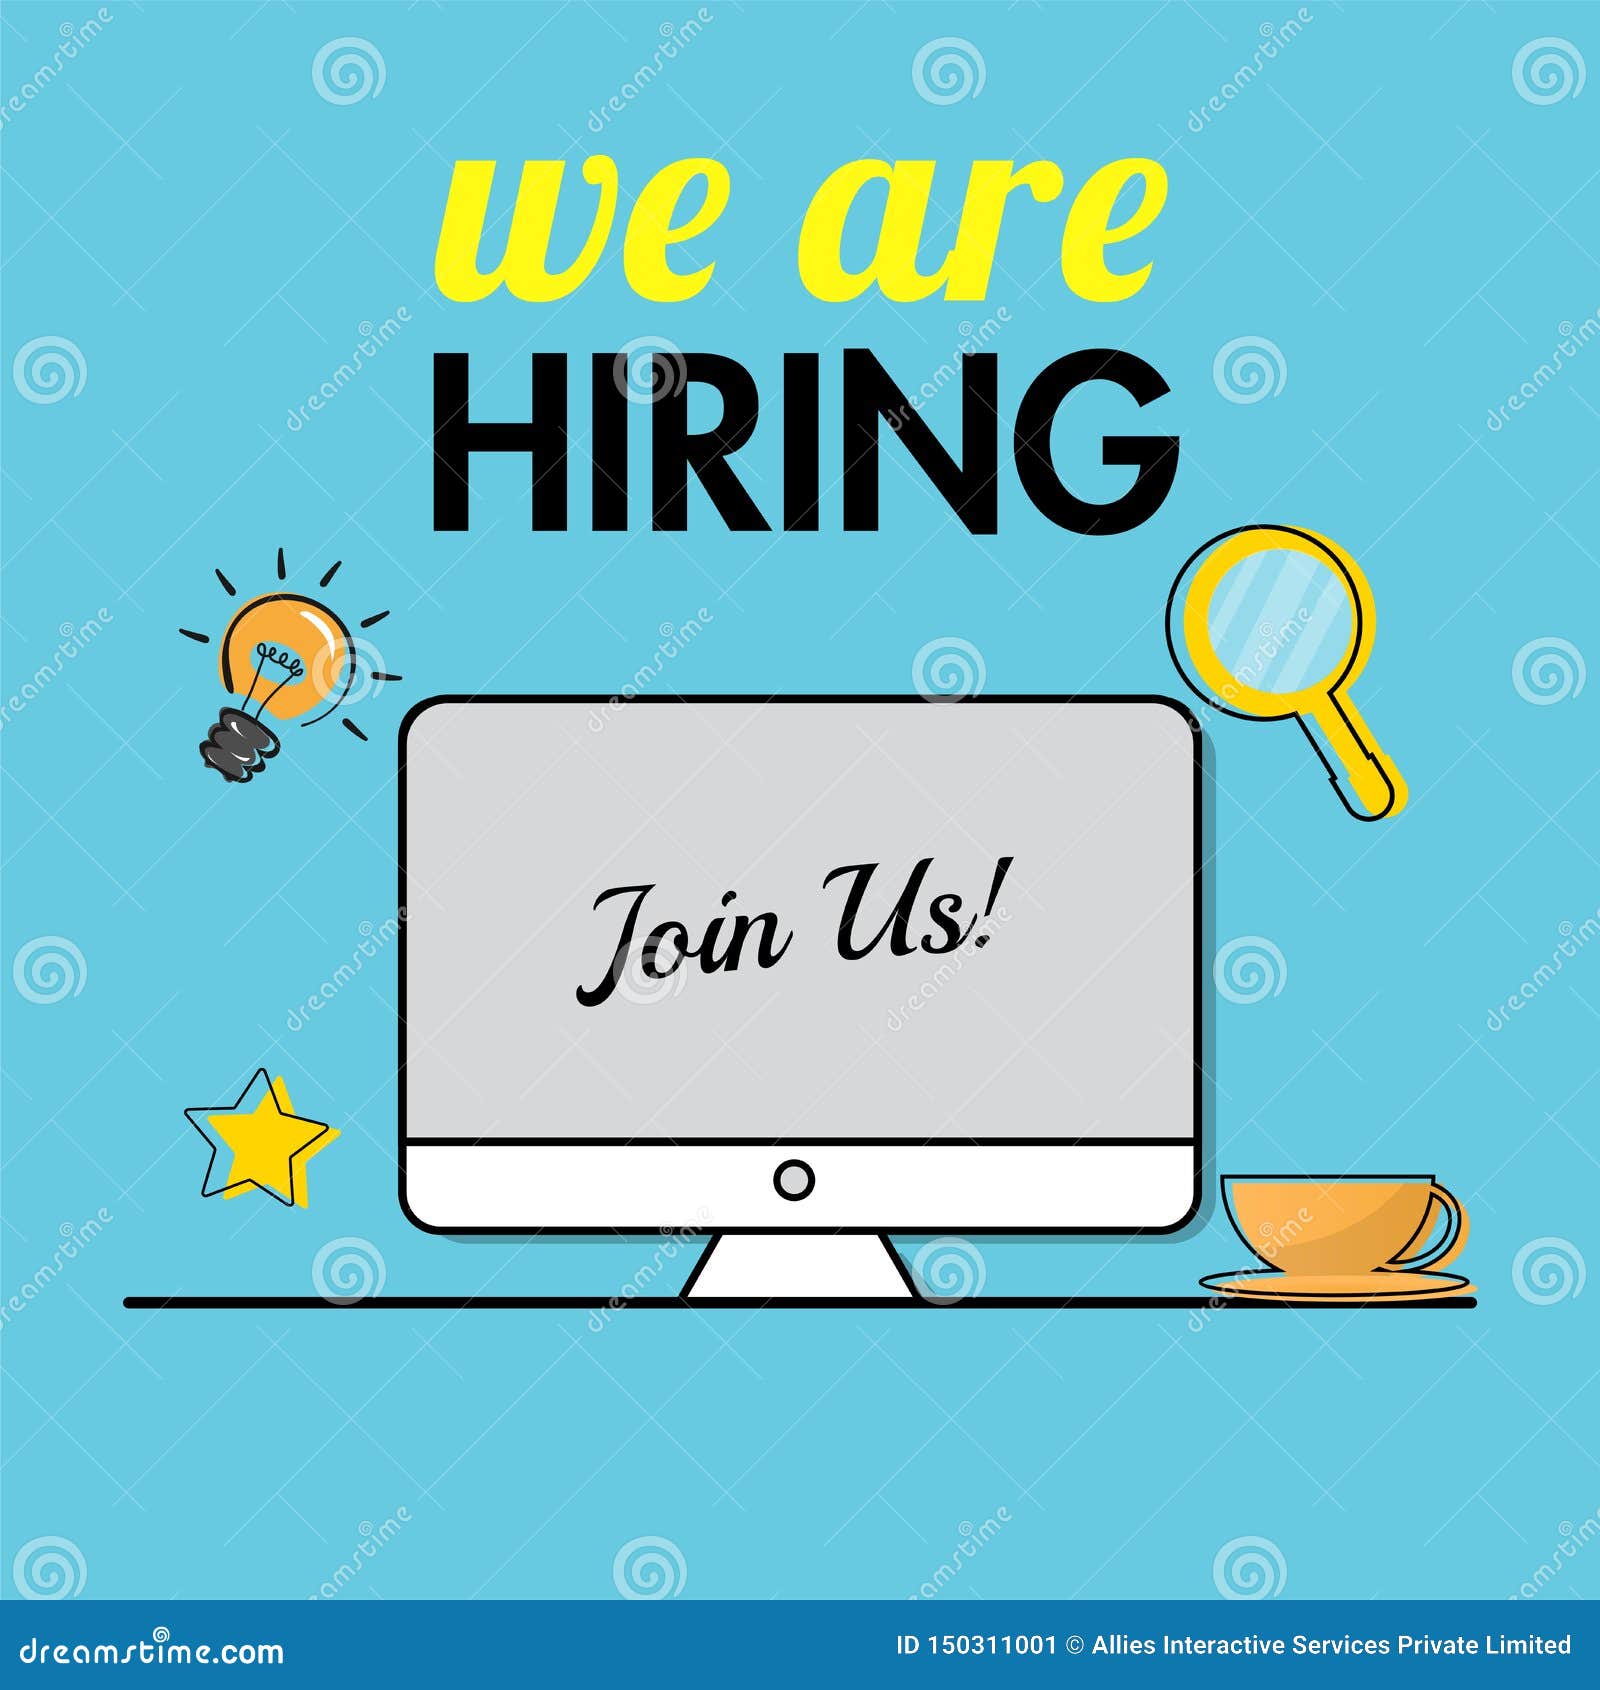 Join Us Office Job Vacancy From Online Advertising By Computer For We Re Hiring Stock Illustration Illustration Of Glass Hiring 150311001